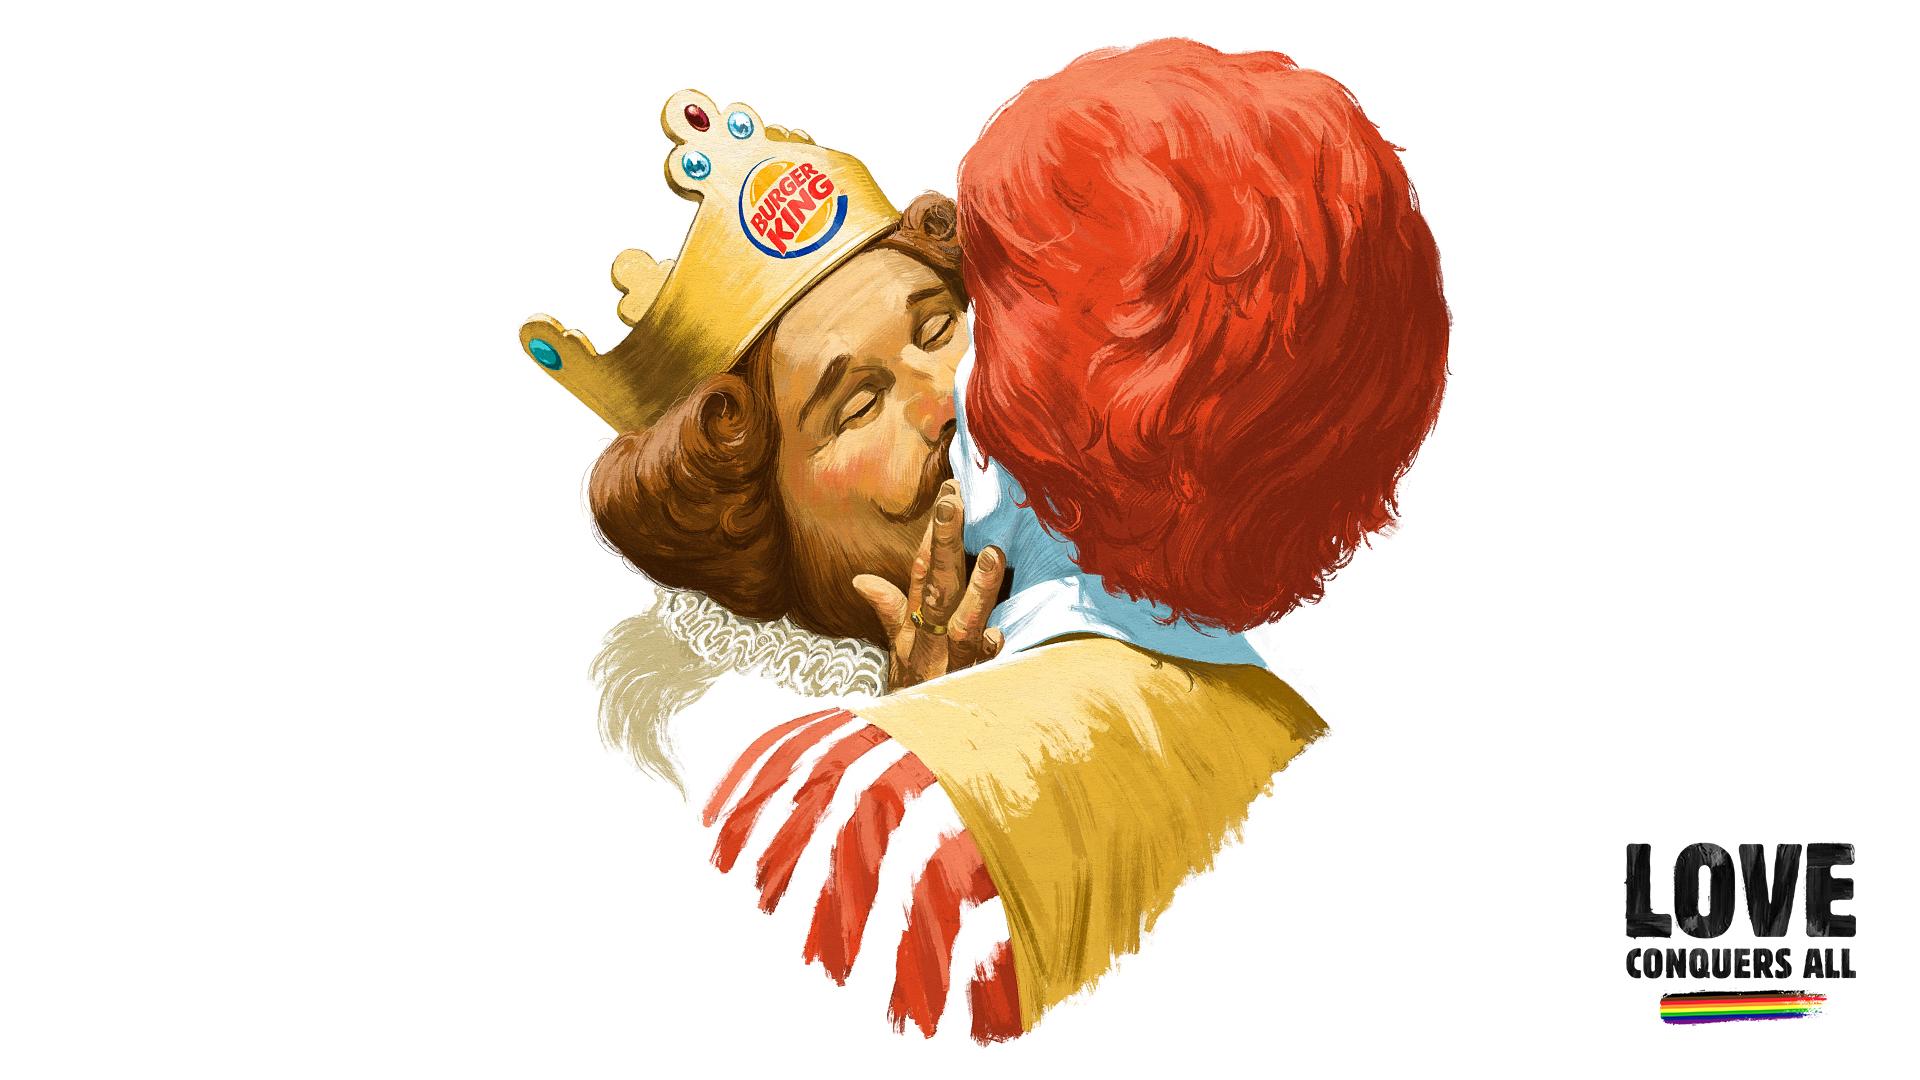 Love conquers all - Burger King